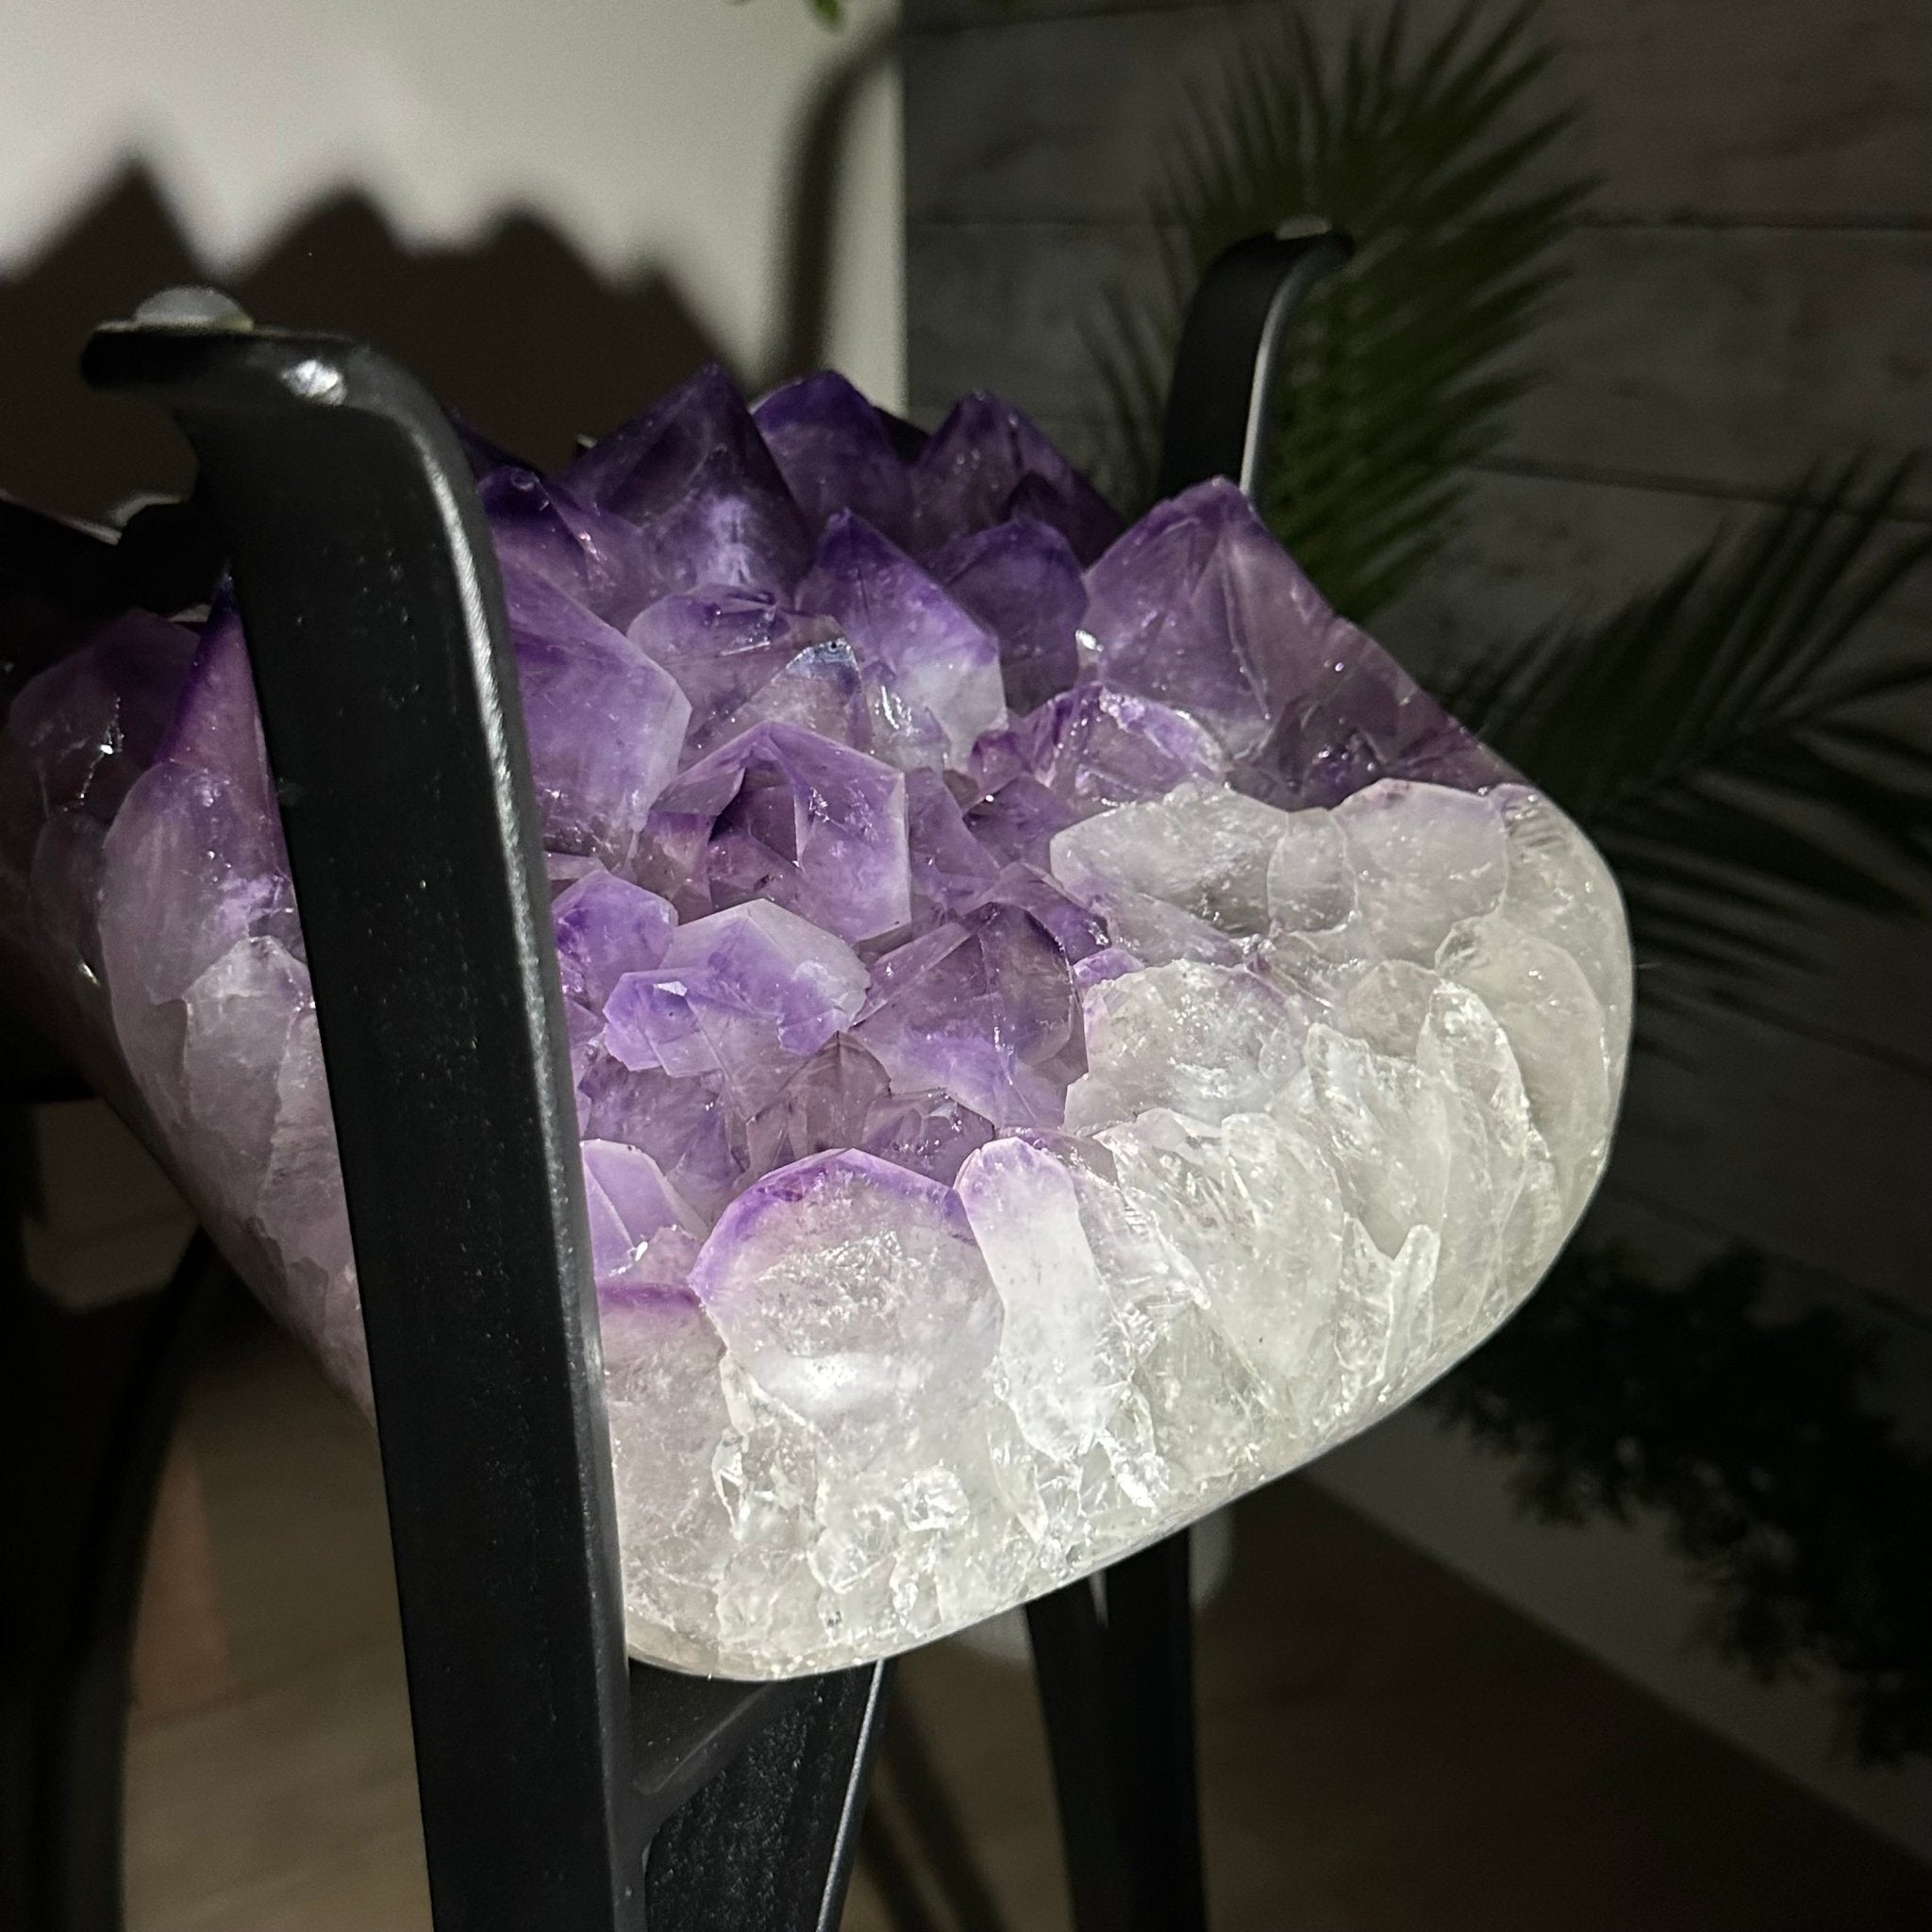 Super Quality Amethyst Geode Side Table, 46.2 lbs, 21.7" Tall #1384-0037 - Brazil GemsBrazil GemsSuper Quality Amethyst Geode Side Table, 46.2 lbs, 21.7" Tall #1384-0037Tables: Side1384-0037